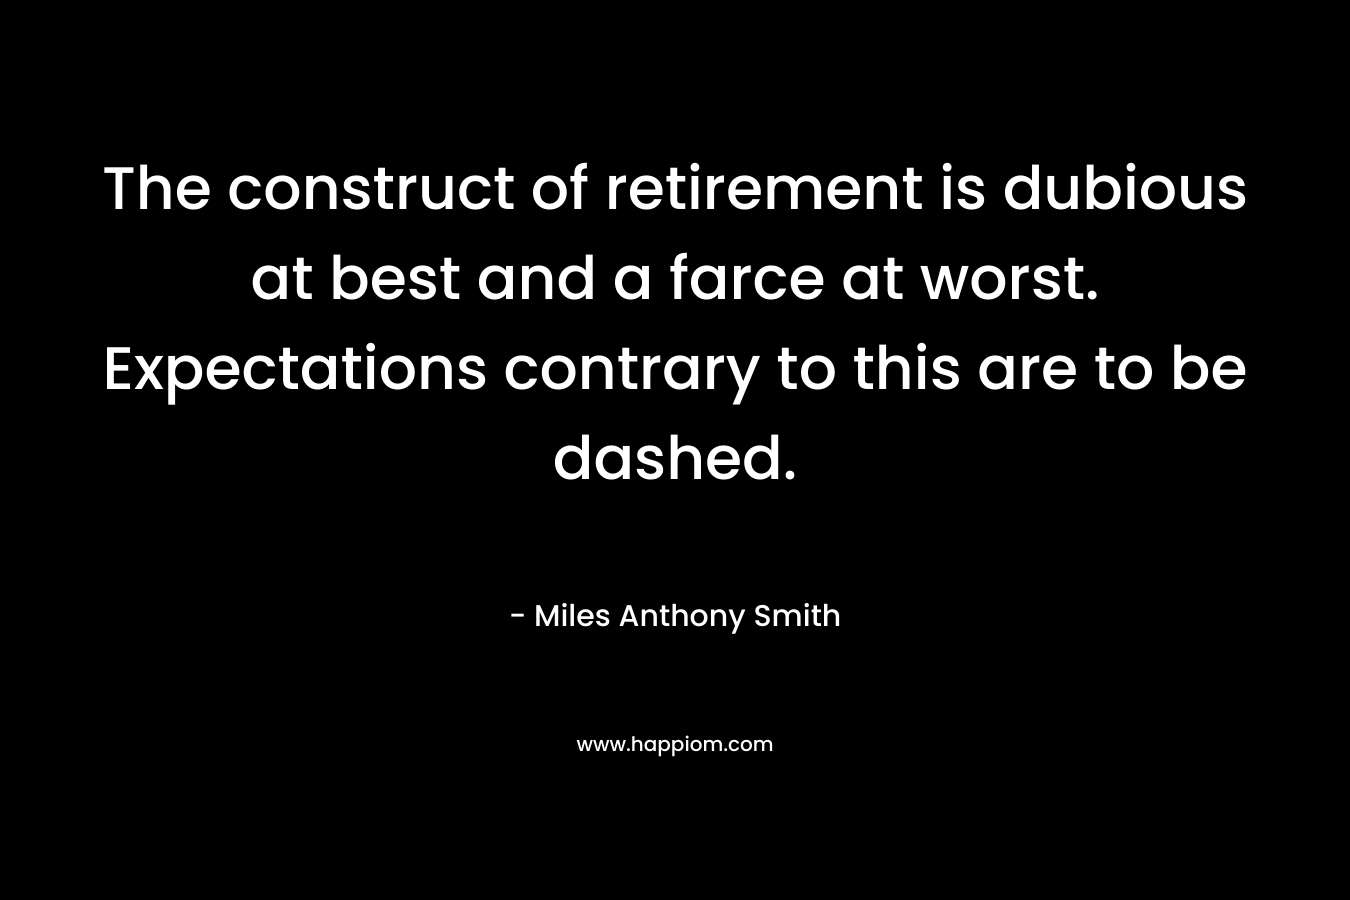 The construct of retirement is dubious at best and a farce at worst. Expectations contrary to this are to be dashed.